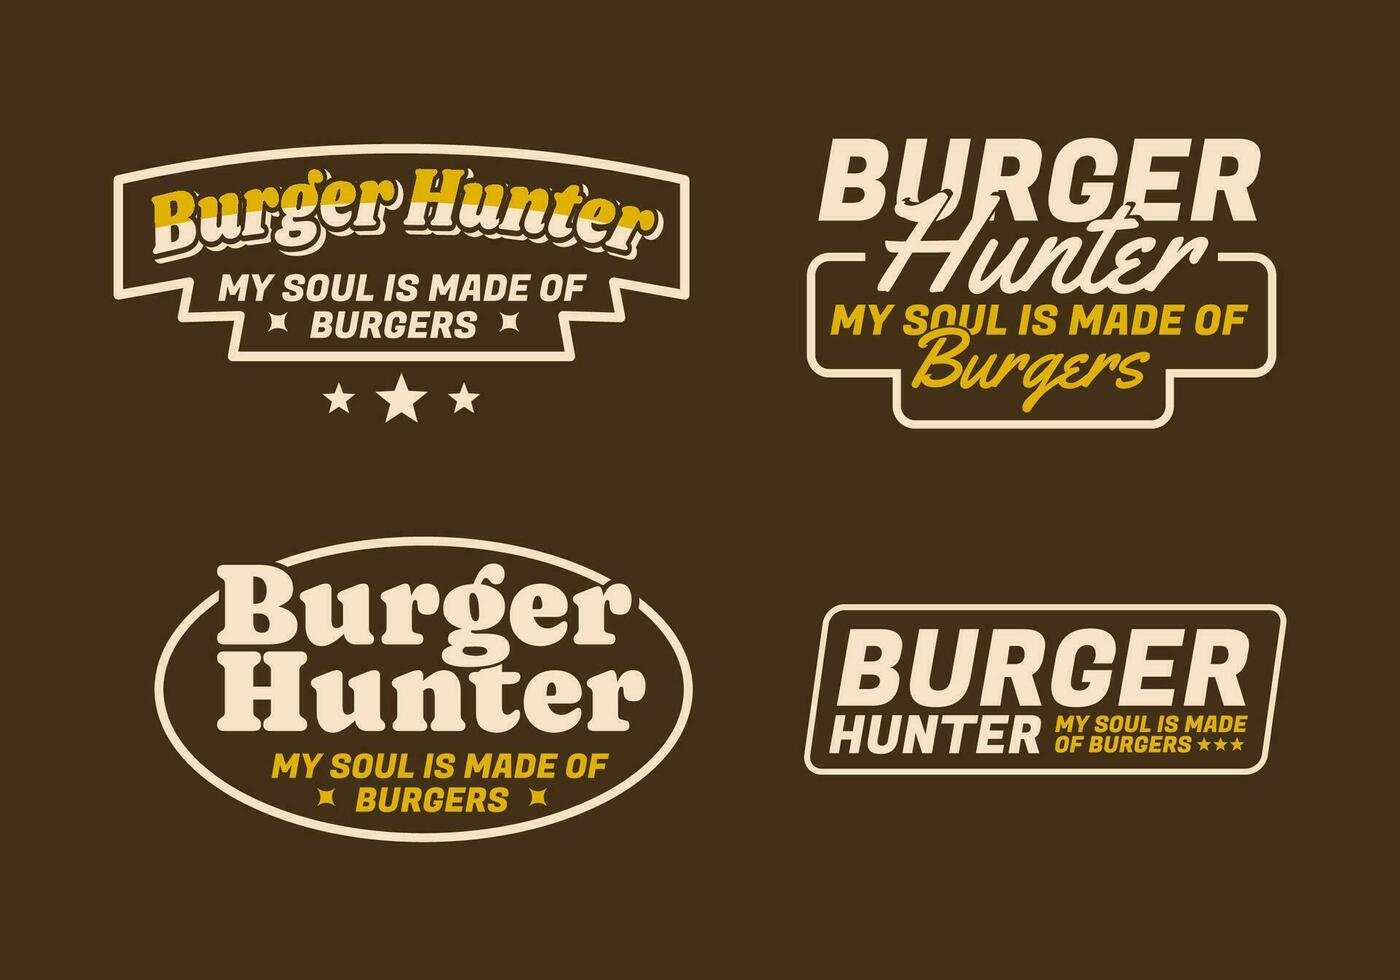 Burger hunter, text art badge in vintage style vector